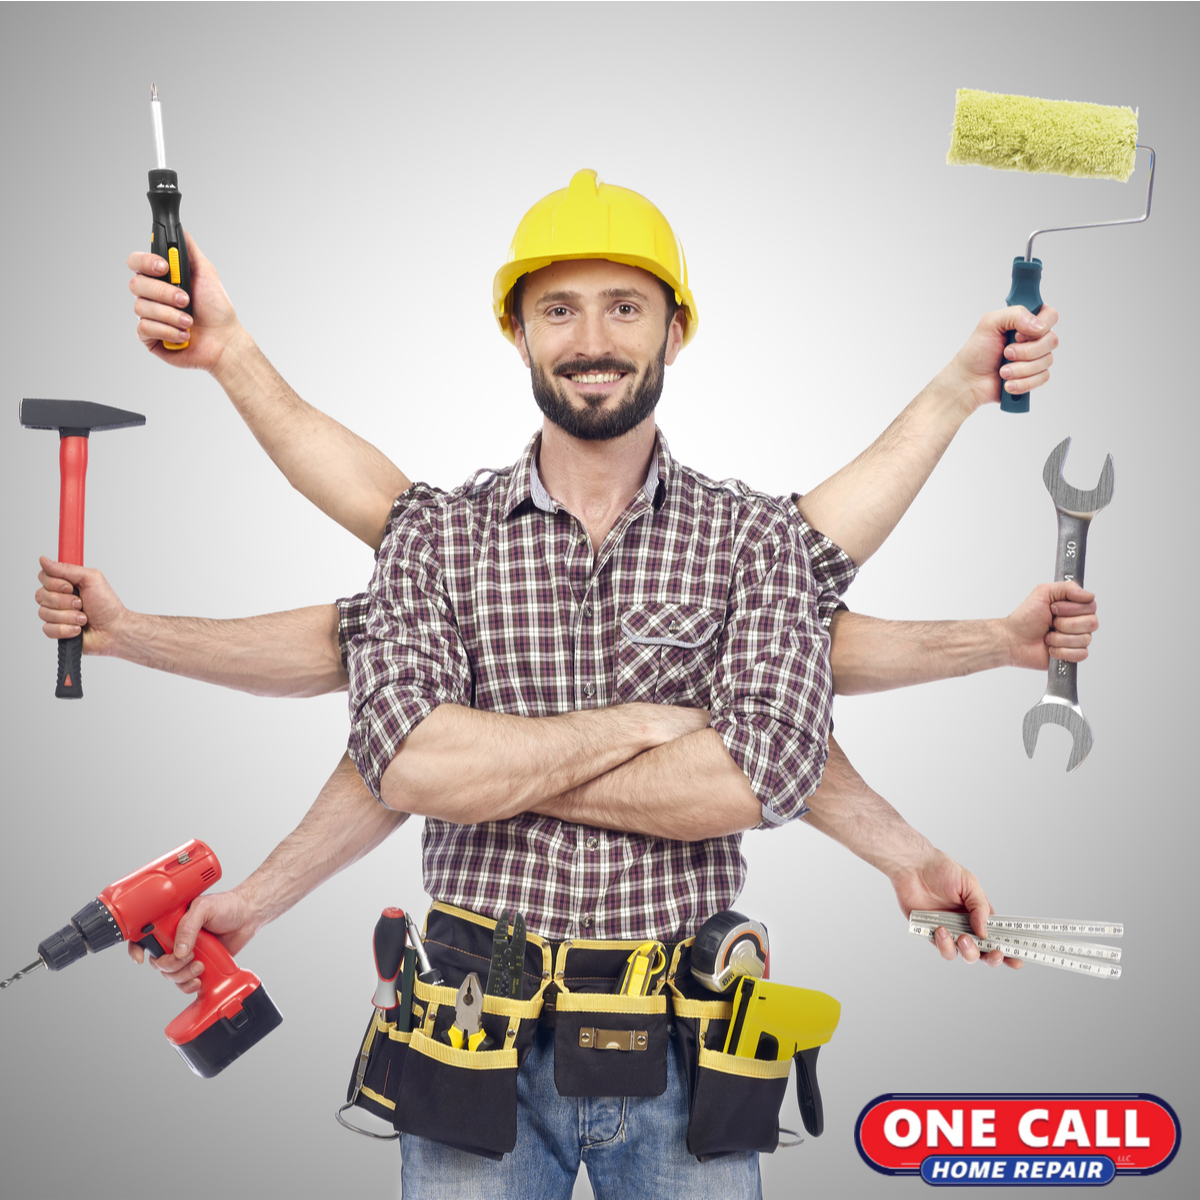 It’s Safer to Go with a Pro for Handyman Help Around Your Brier Home